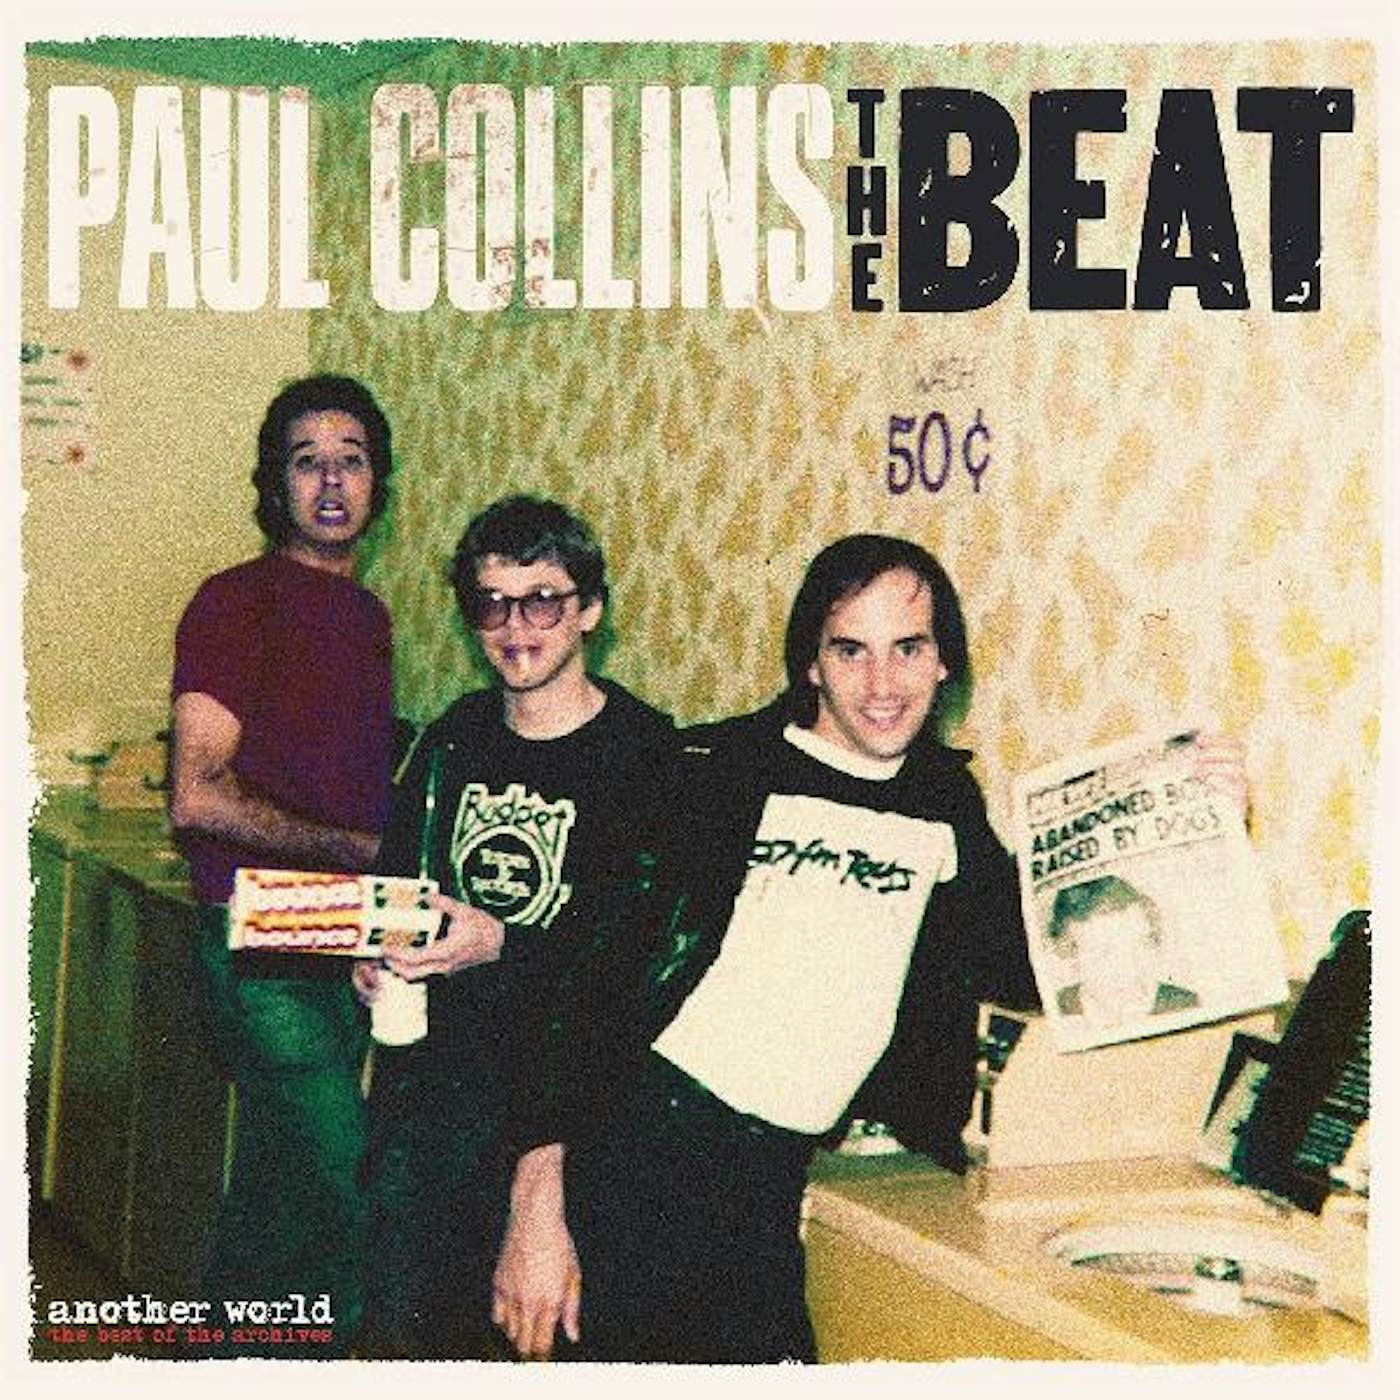 Paul Collins Beat ANOTHER WORLD - THE BEST OF THE ARCHIVES CD